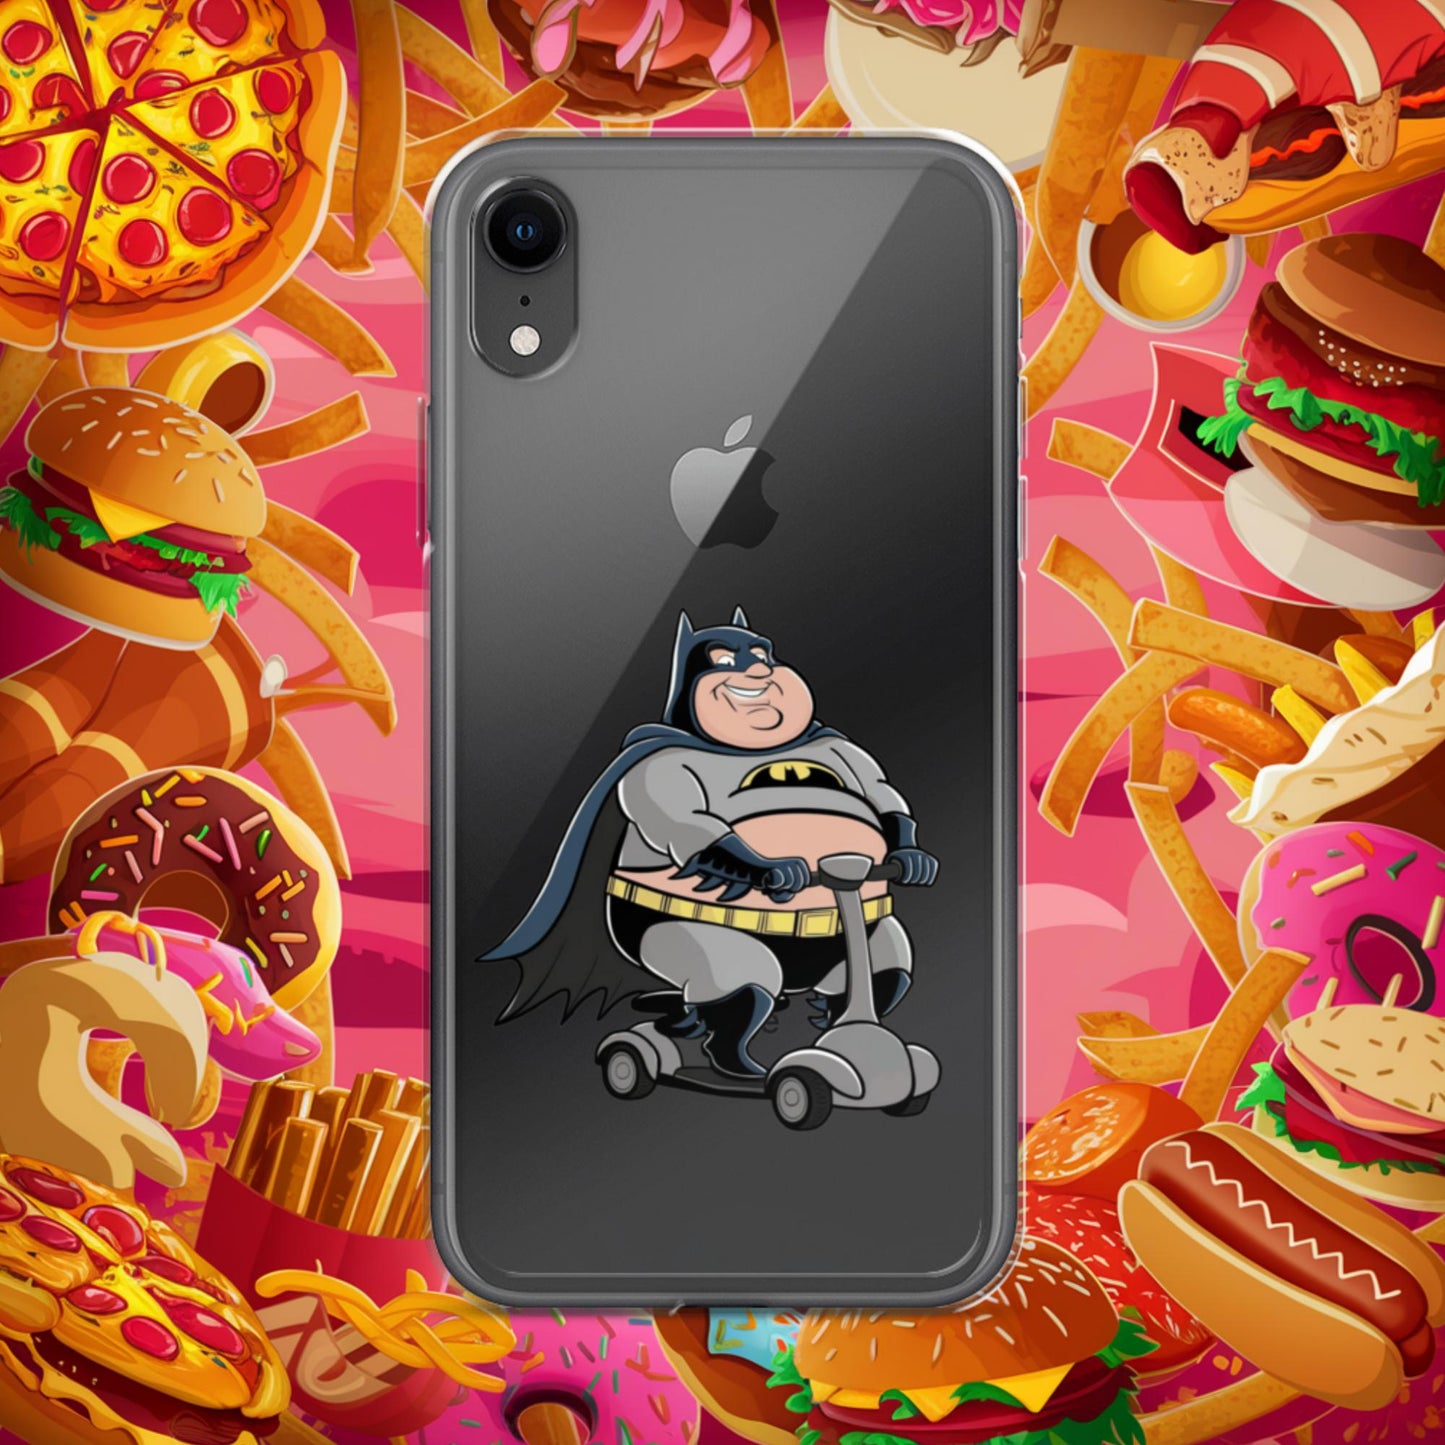 Fatman Fat Superhero Funny Clear Case for iPhone Next Cult Brand